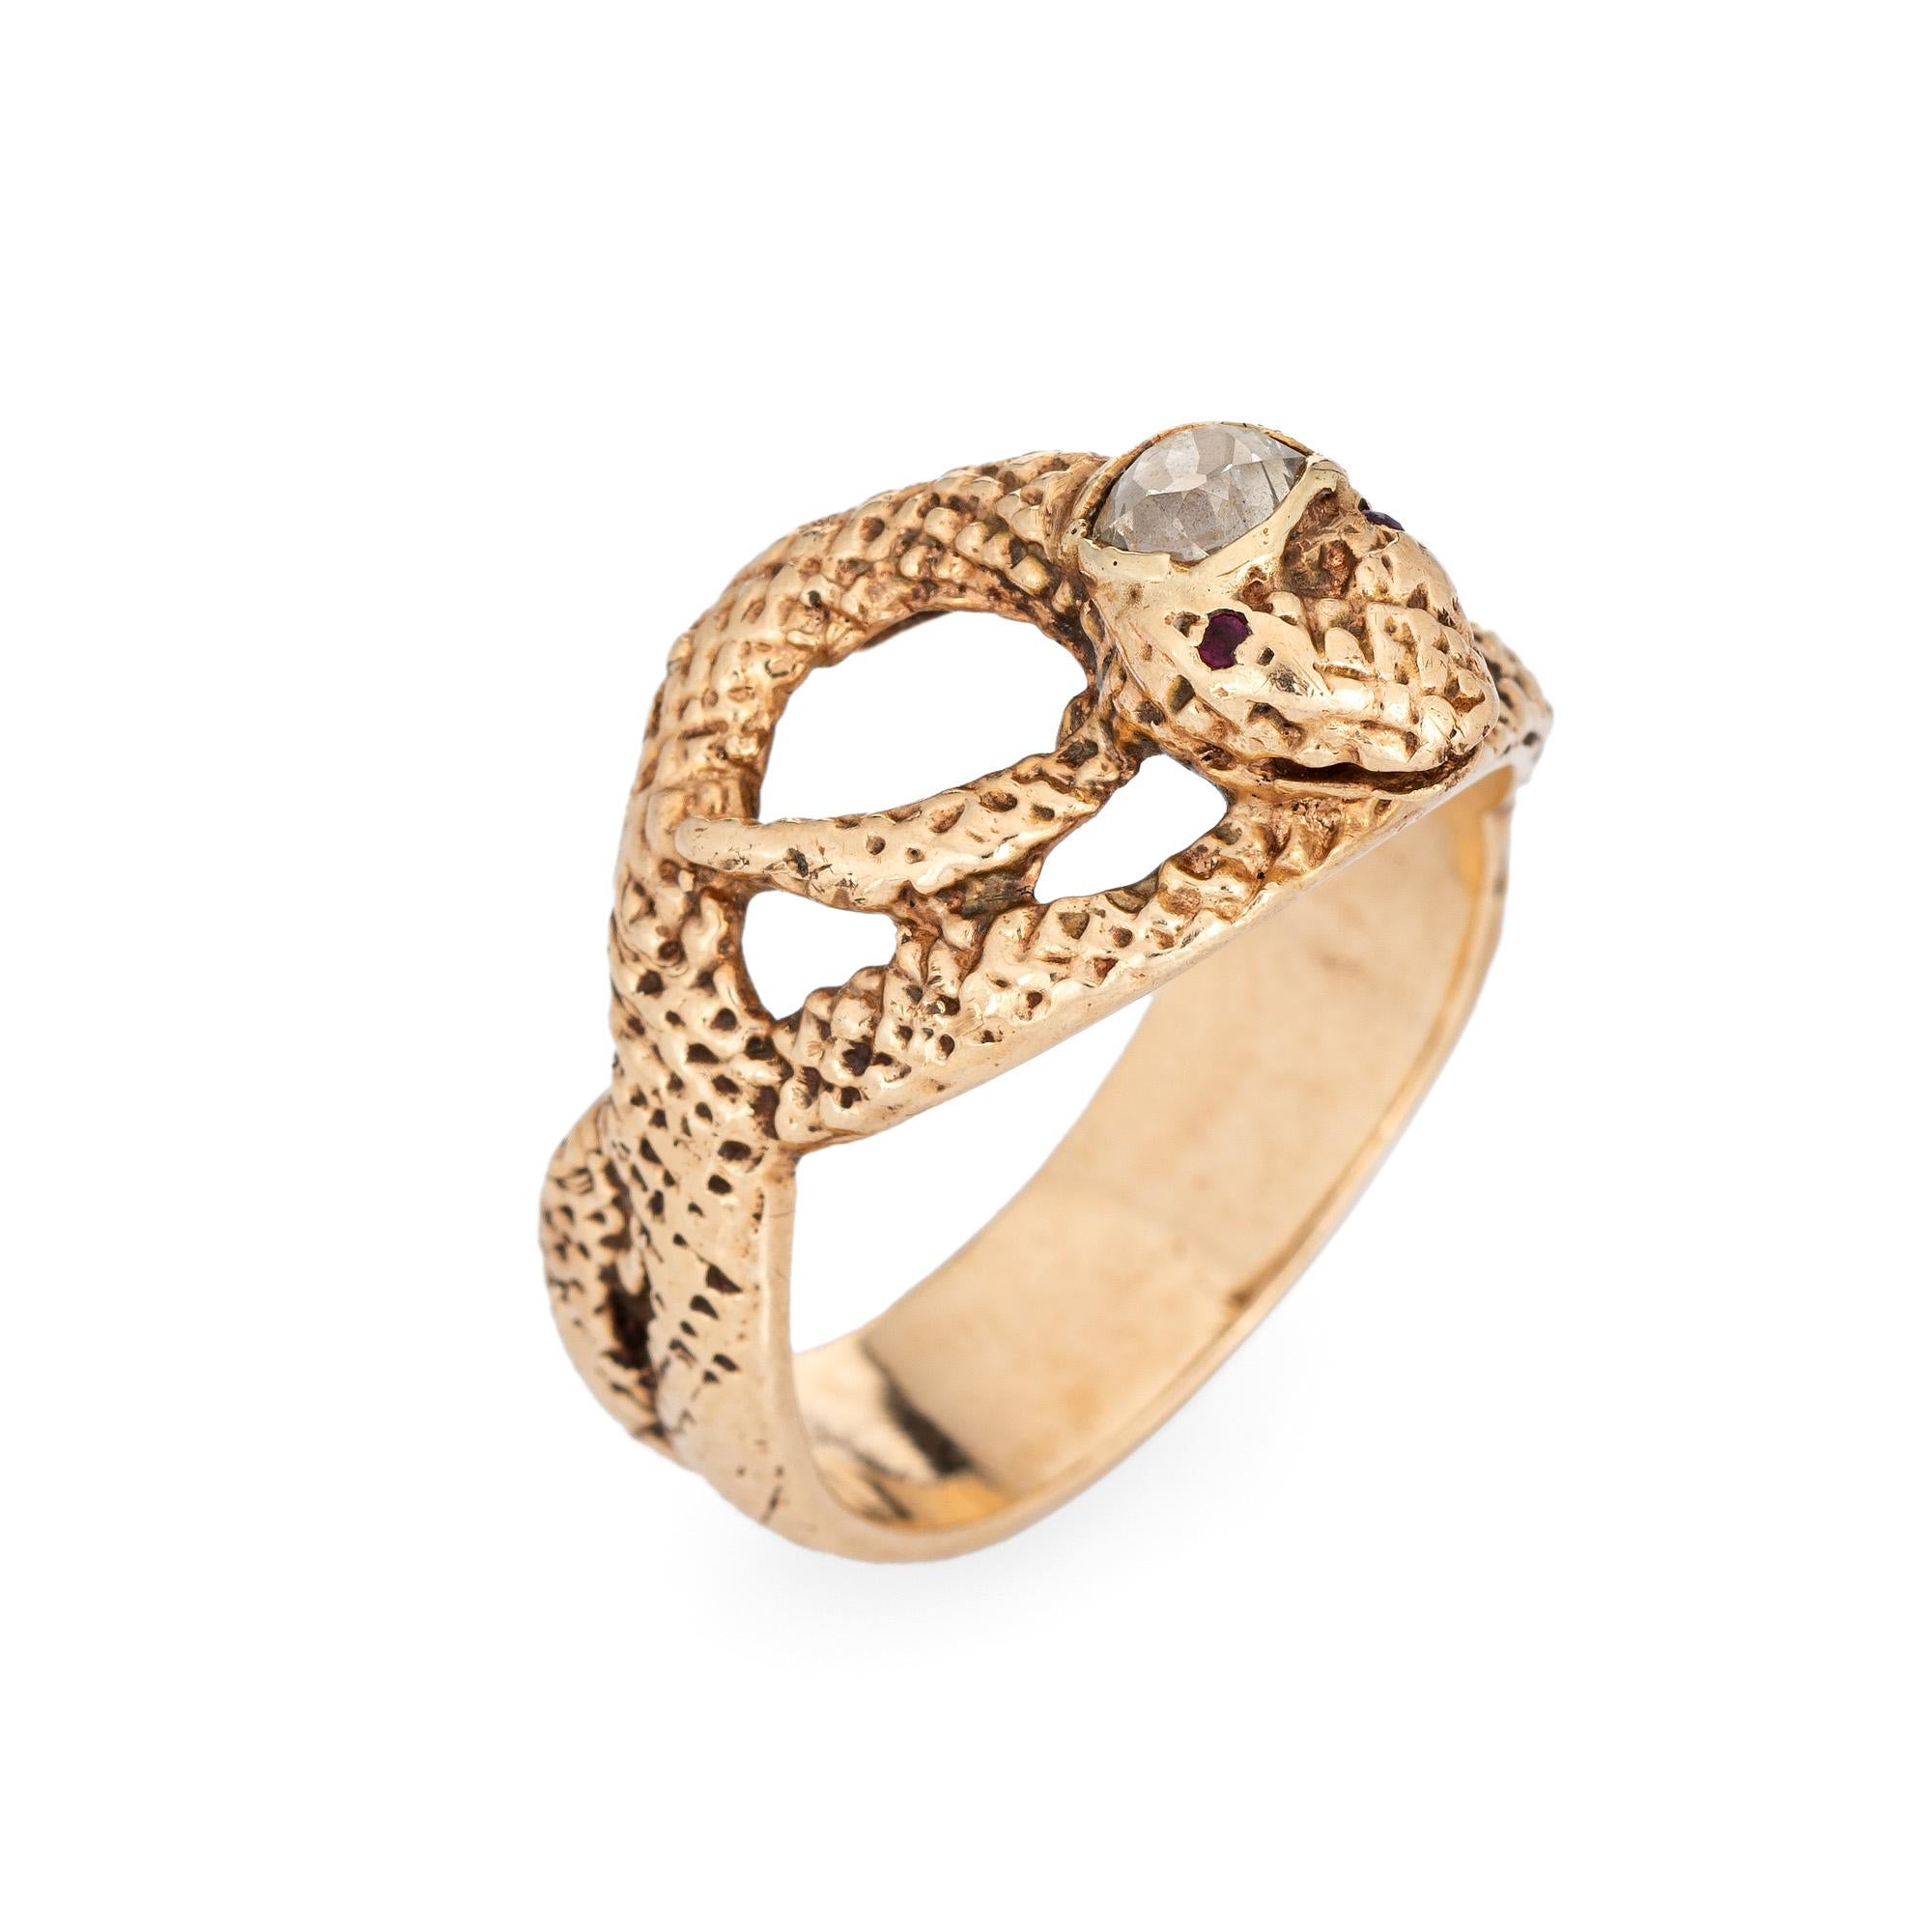 Finely detailed antique Victorian coiled diamond snake ring, crafted in 14 karat yellow gold (circa 1880s to 1900s). 

Old mine cut diamond is estimated at 0.25 carats (estimated at L-M color and SI2 clarity). Two red paste stones are estimated at